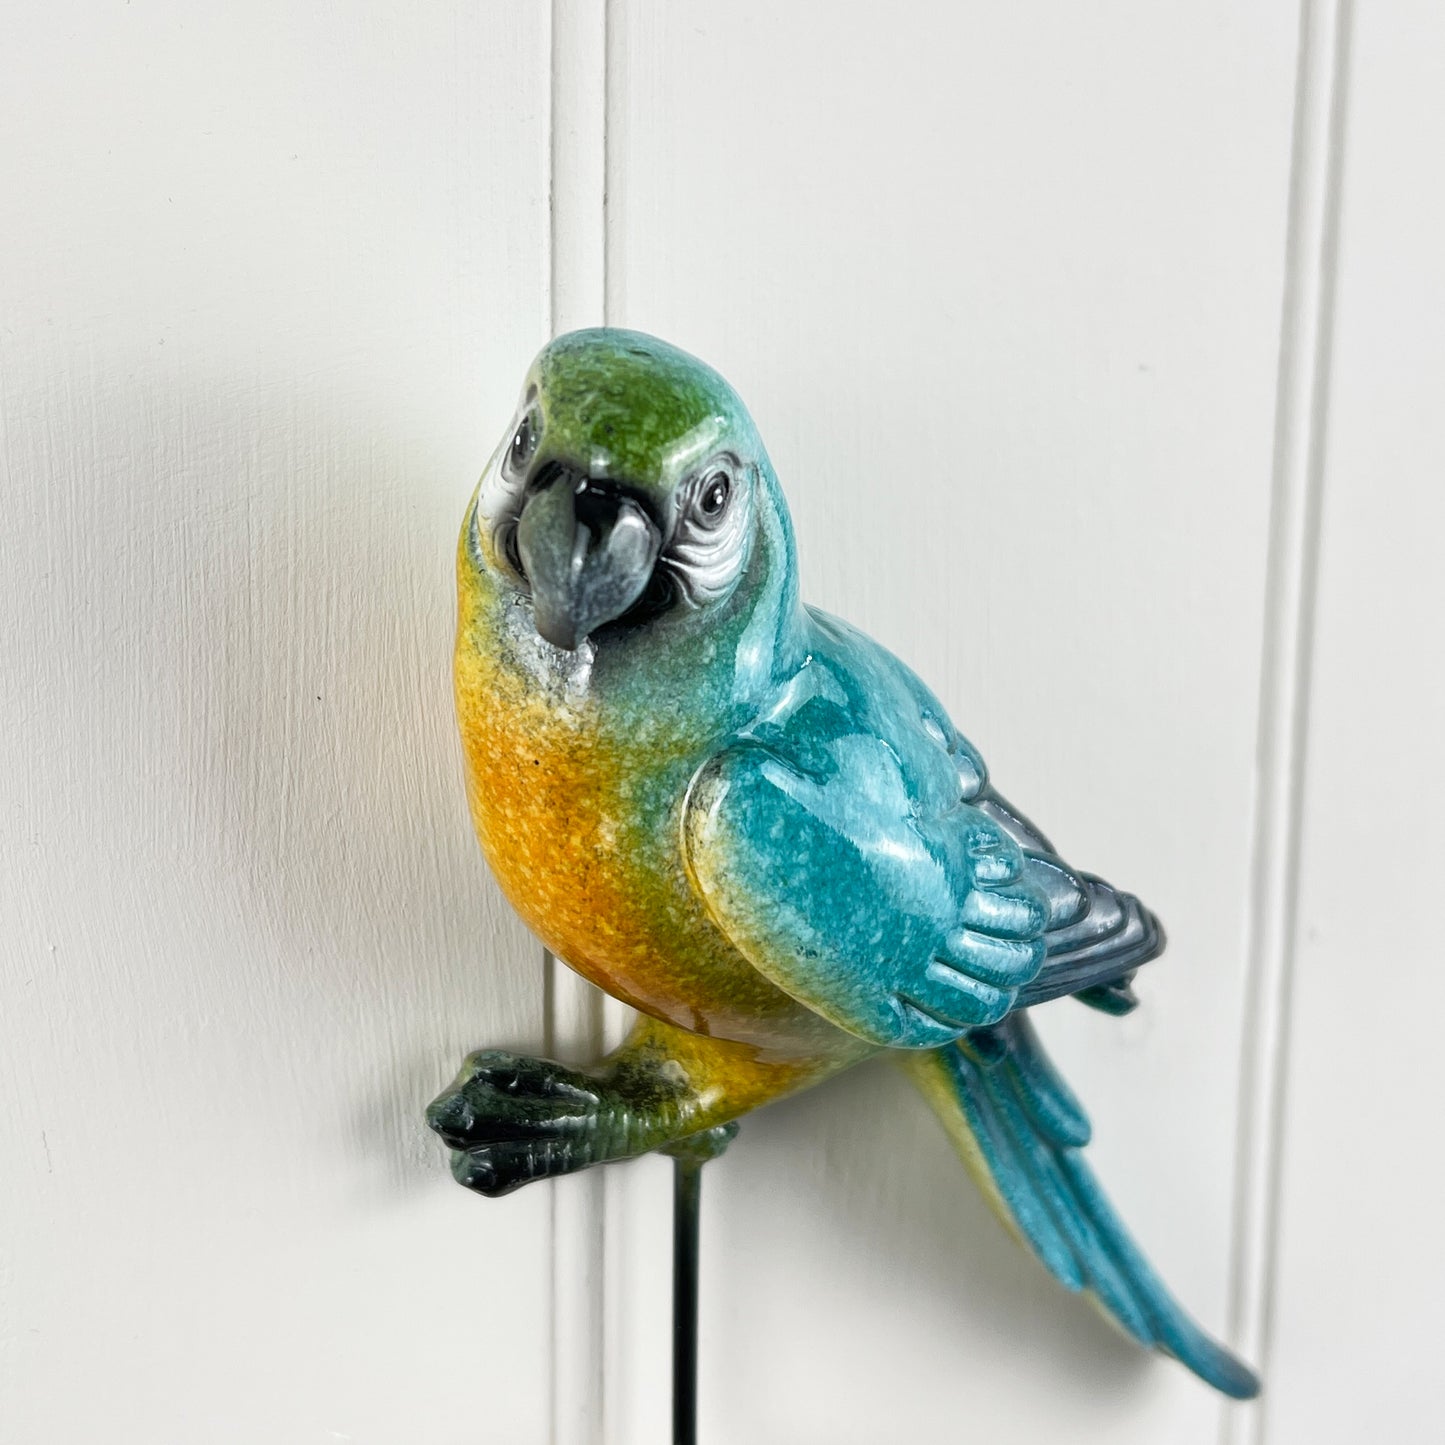 Wall Mounted Parrot Storage Hook